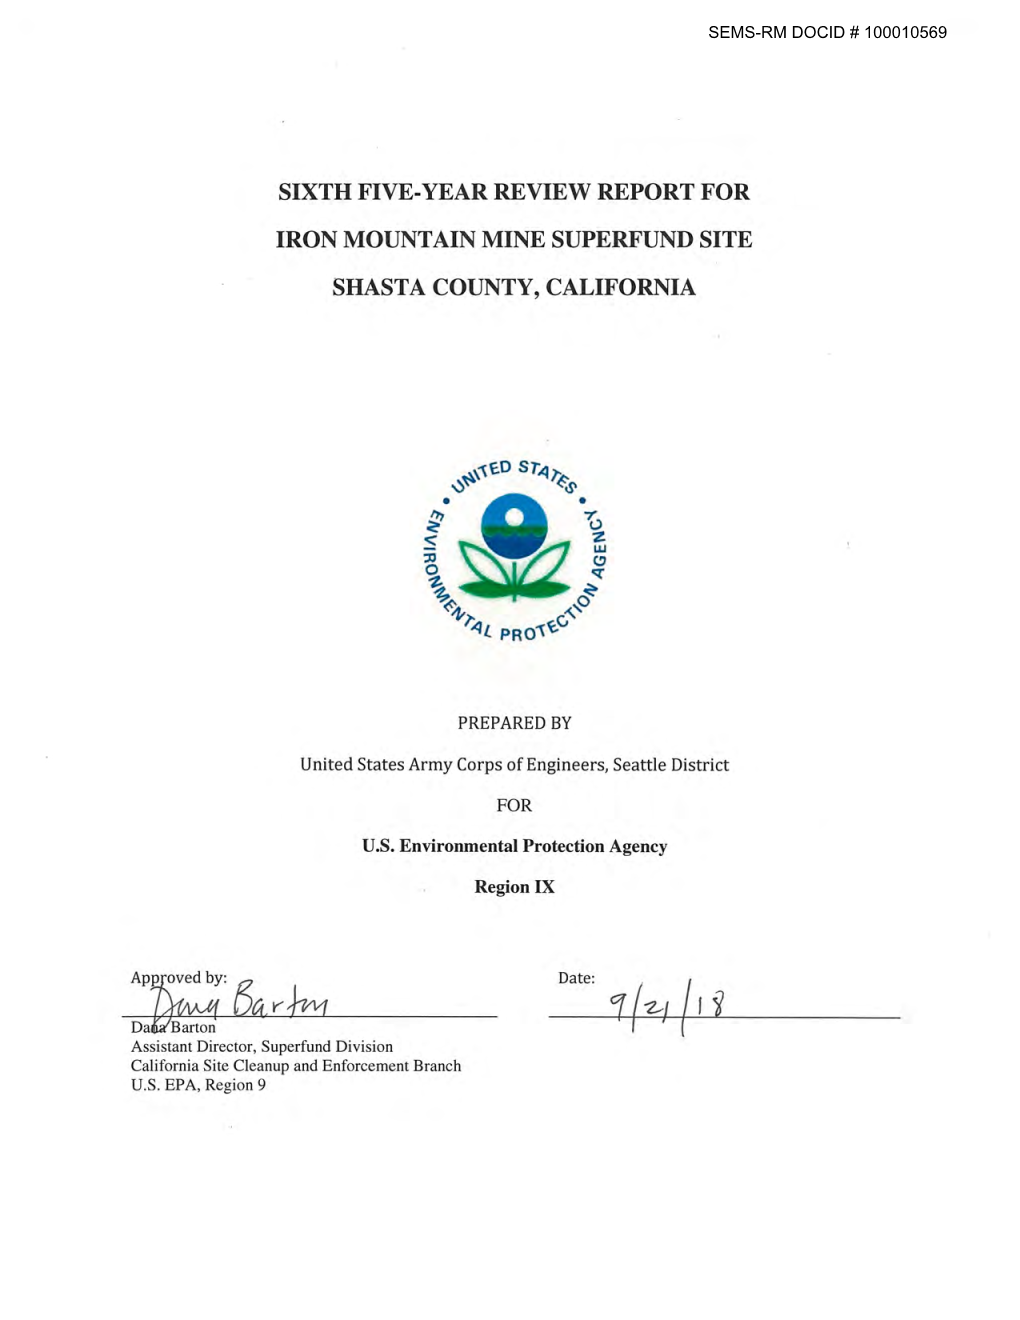 6Th 5-Year Review for Iron Mountain Mine Superfund Site, W/Appendices